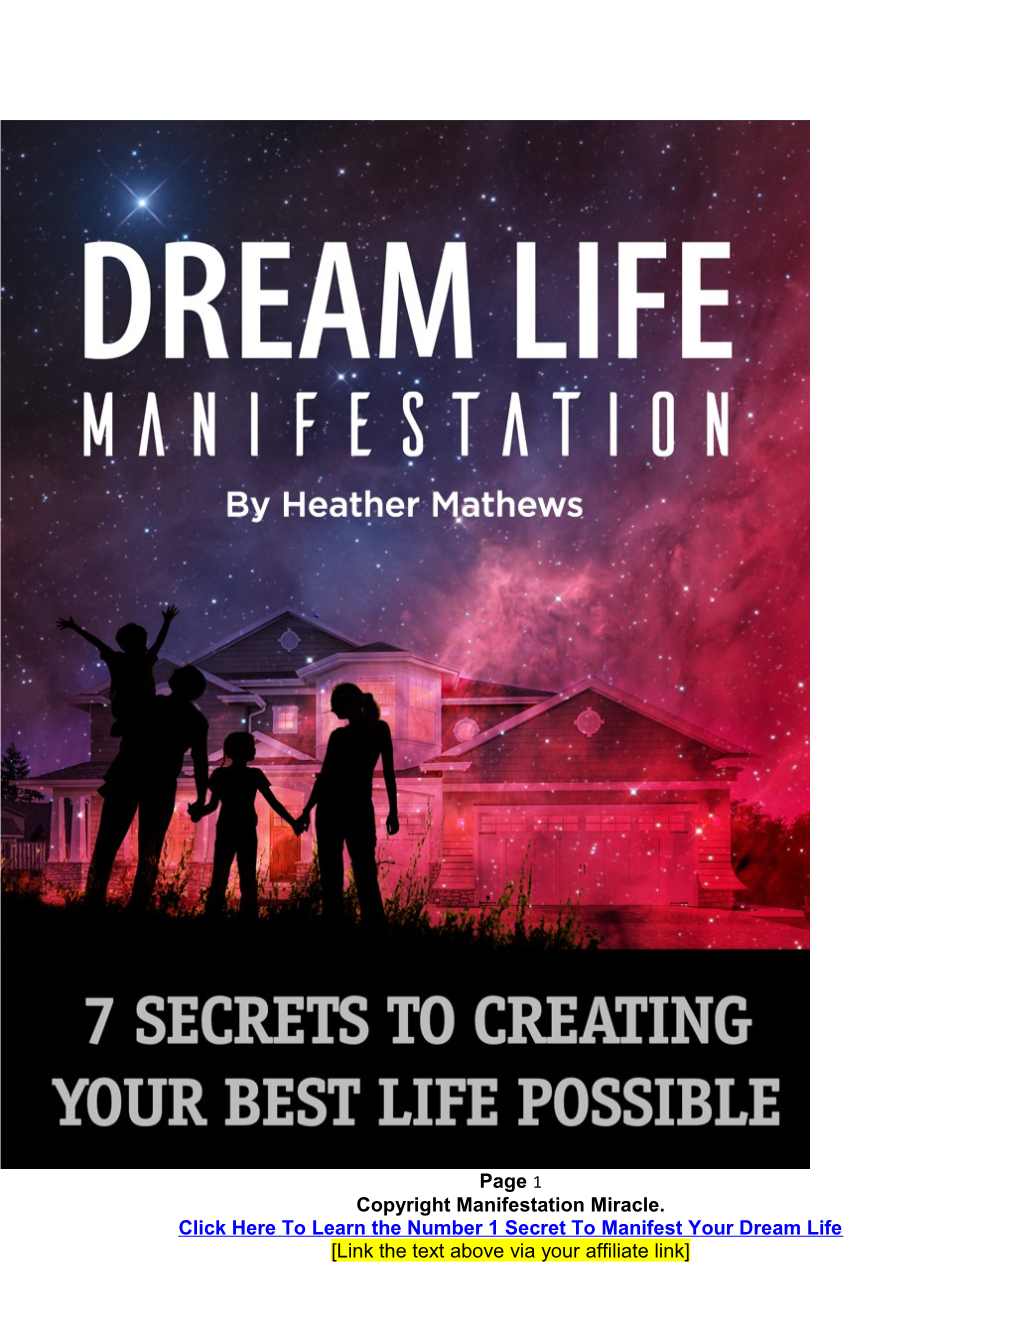 Dream Life Manifestation: 7 Secrets to Creating Your Best Life Possible